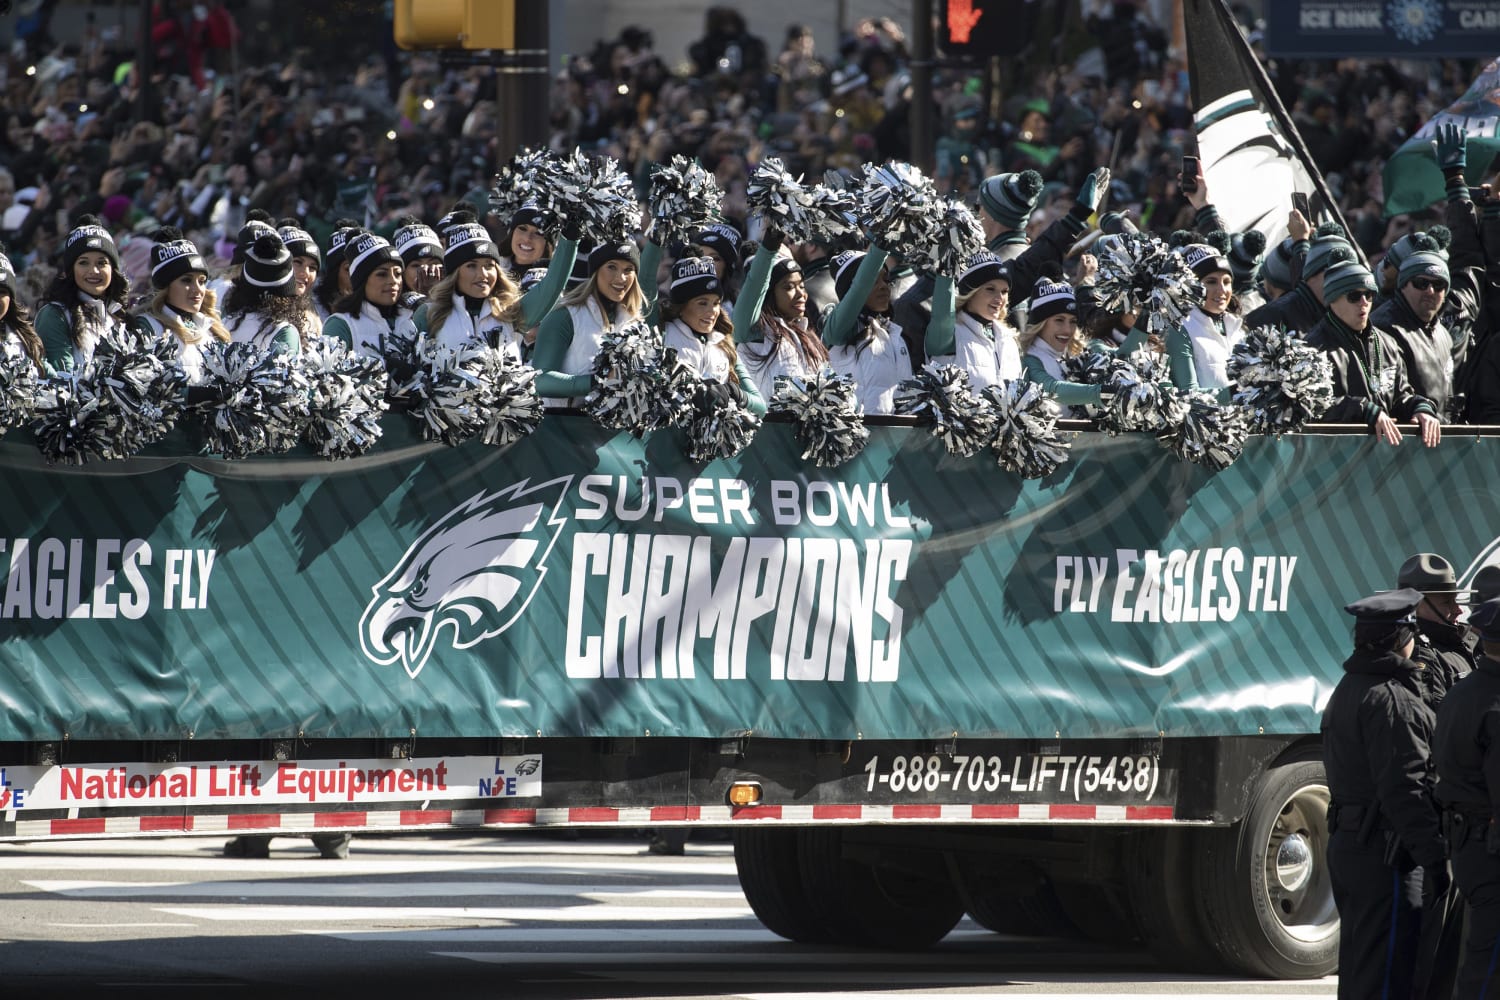 Millions celebrate Eagles victory at Super Bowl parade